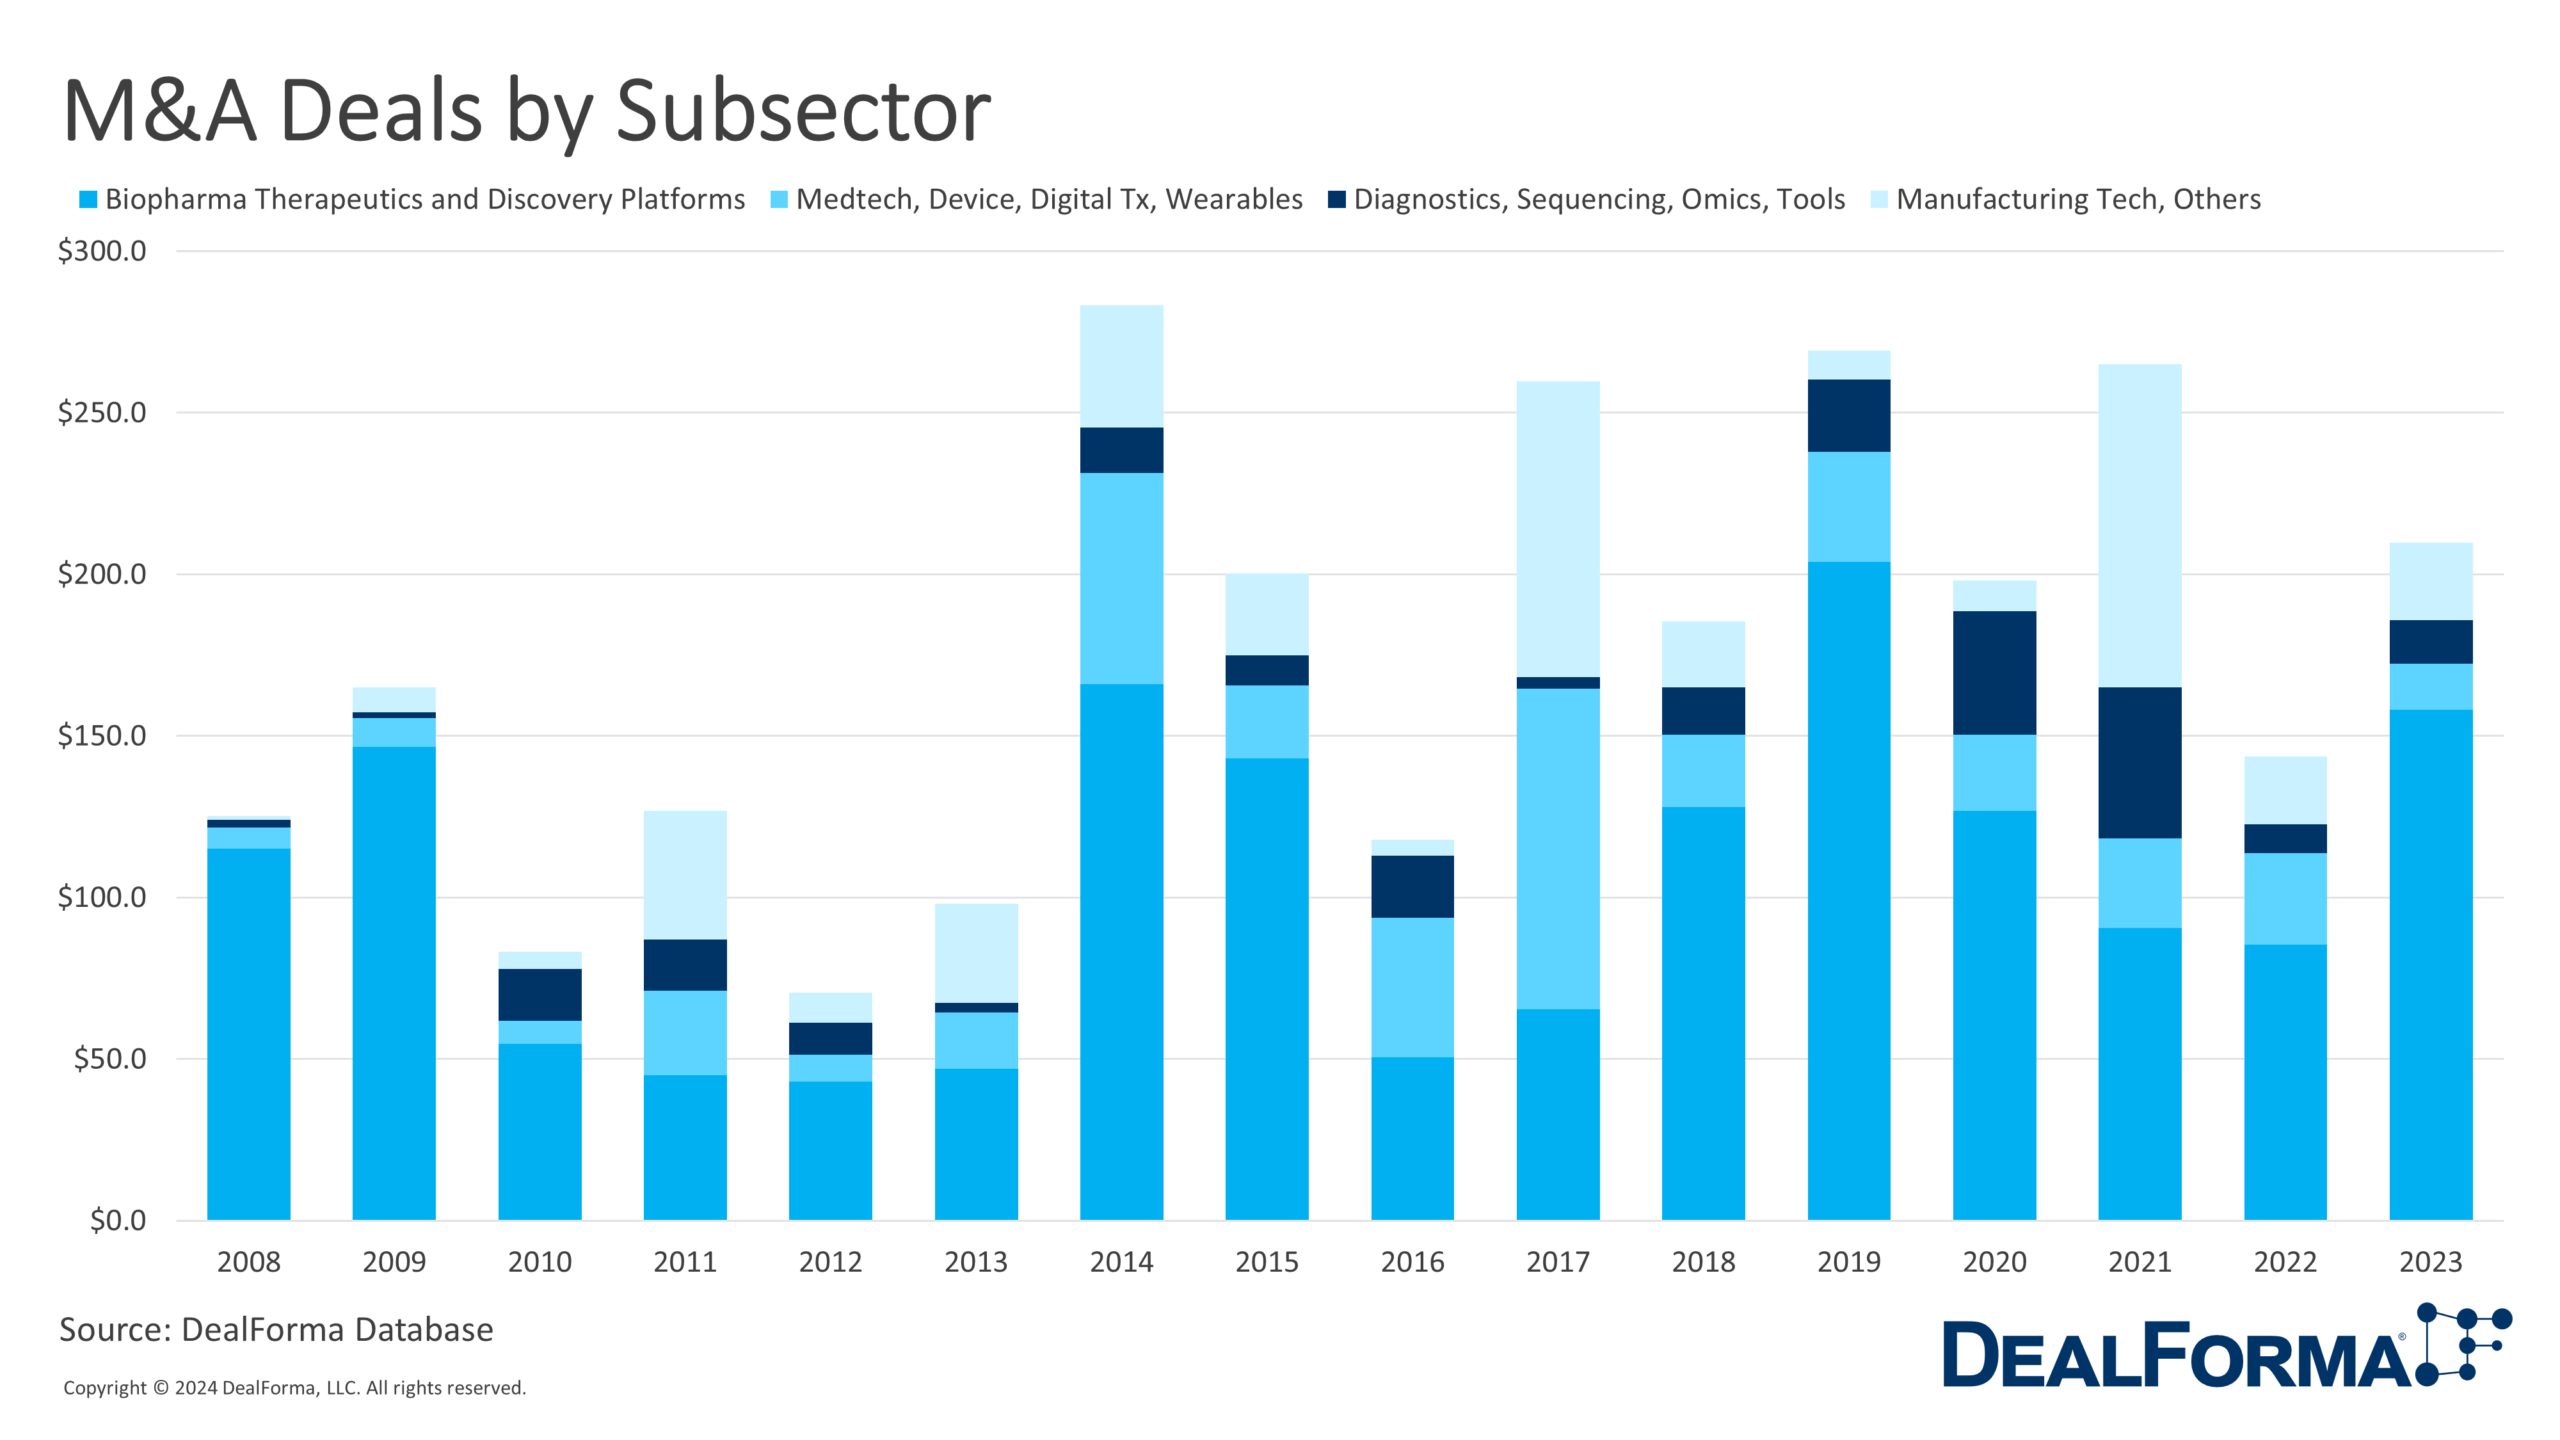 M&A Deals by Subsector